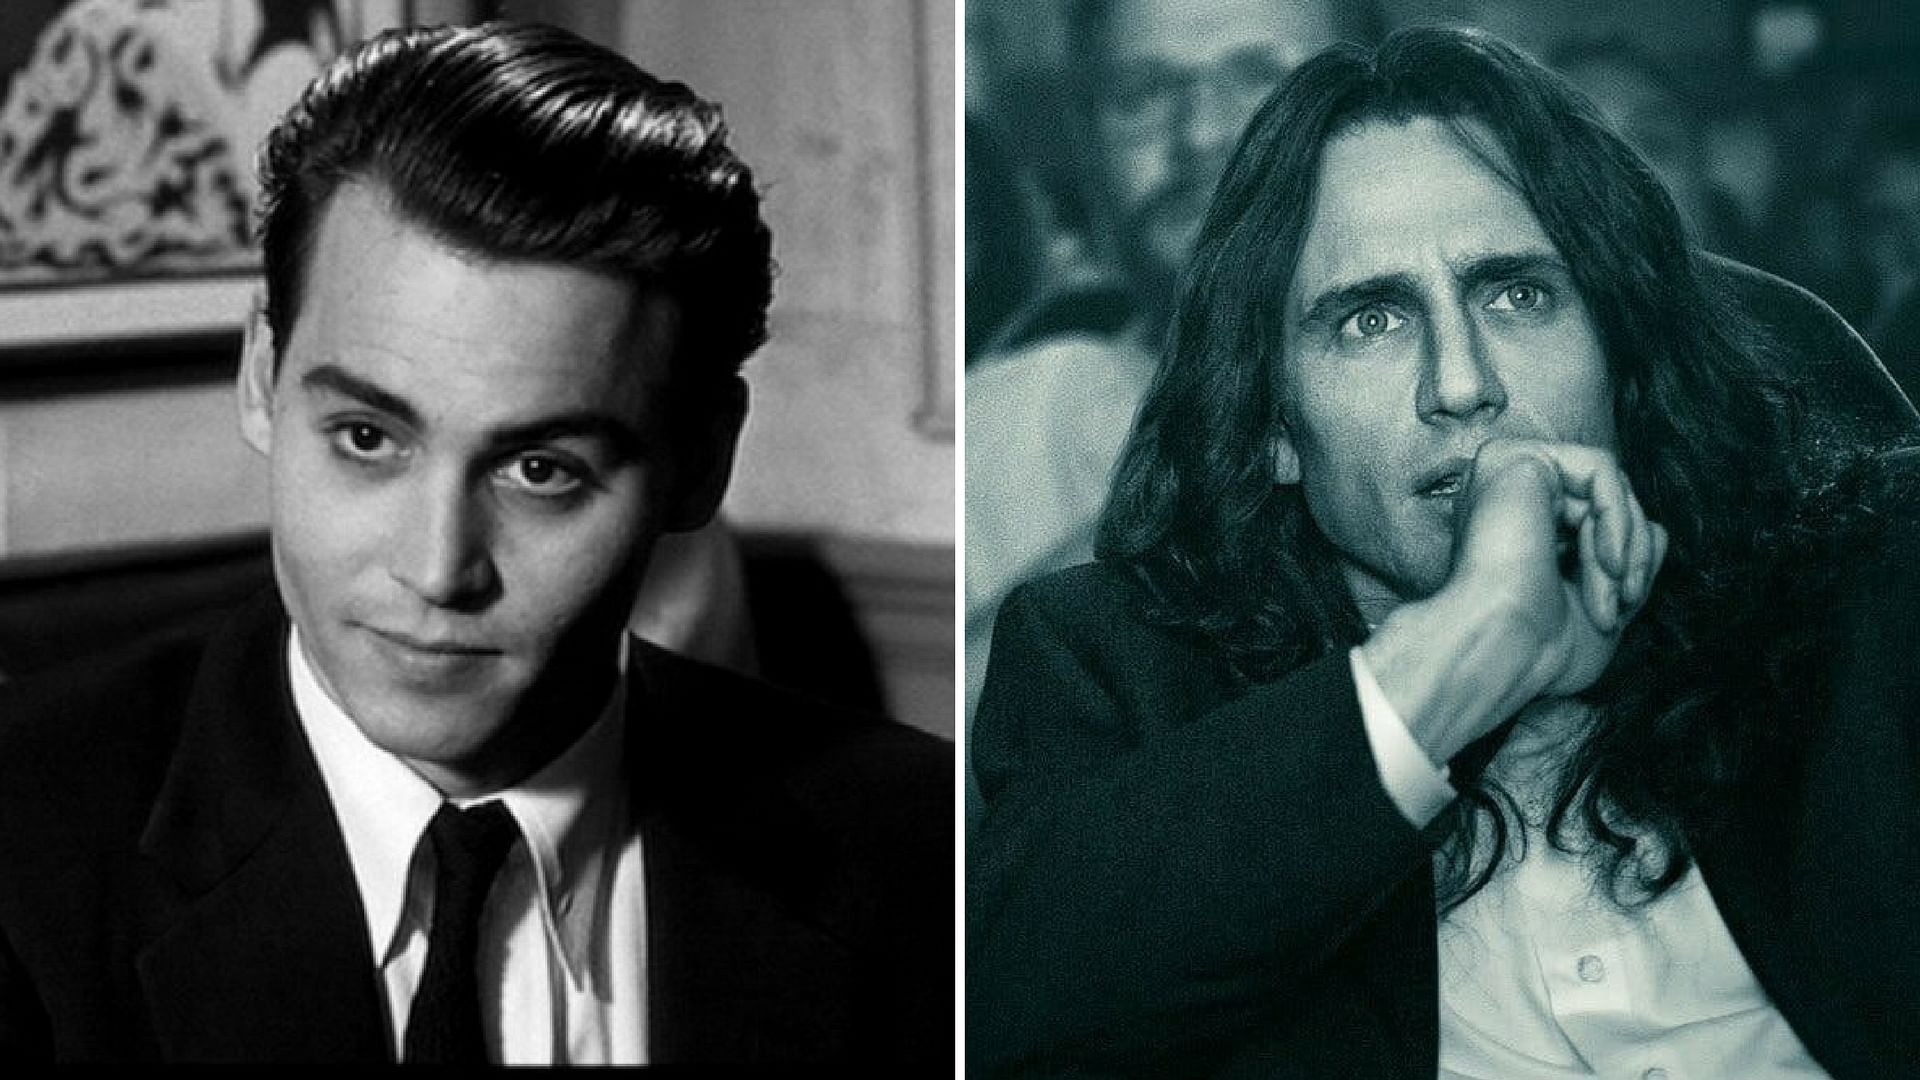 Johnny Depp as Edward D Wood Jr in Ed Wood (left) and James Franco as Tommy Wiseau in The Disaster Artist (right).